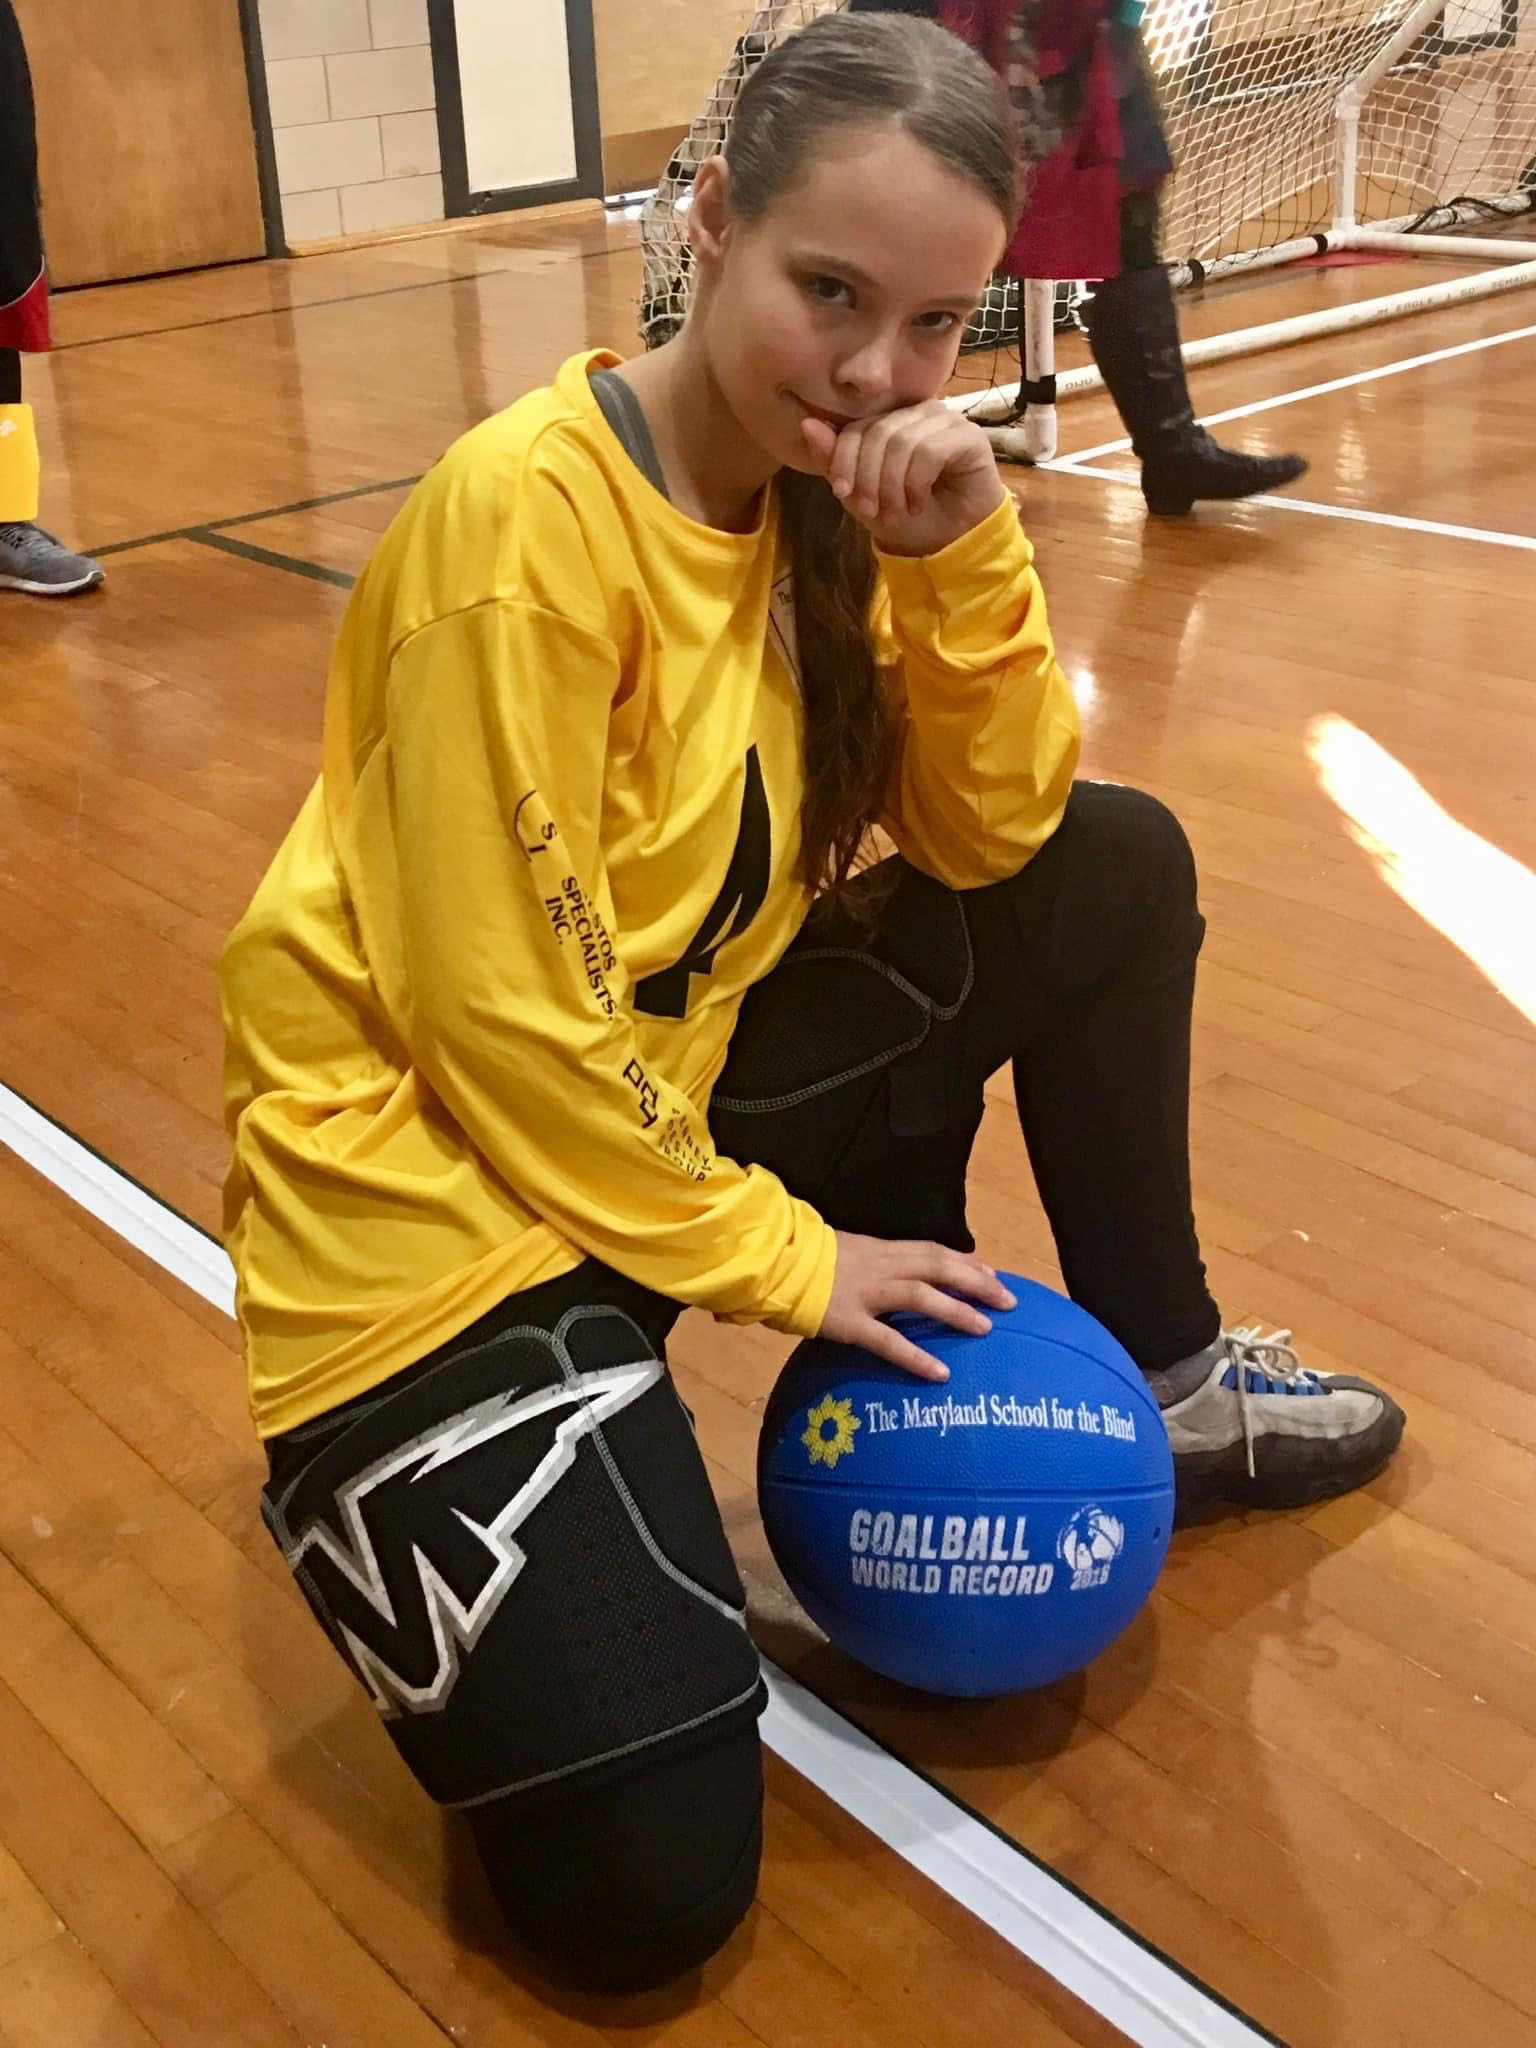 Female athlete kneeling on the ground with blue ball smiling at the camera